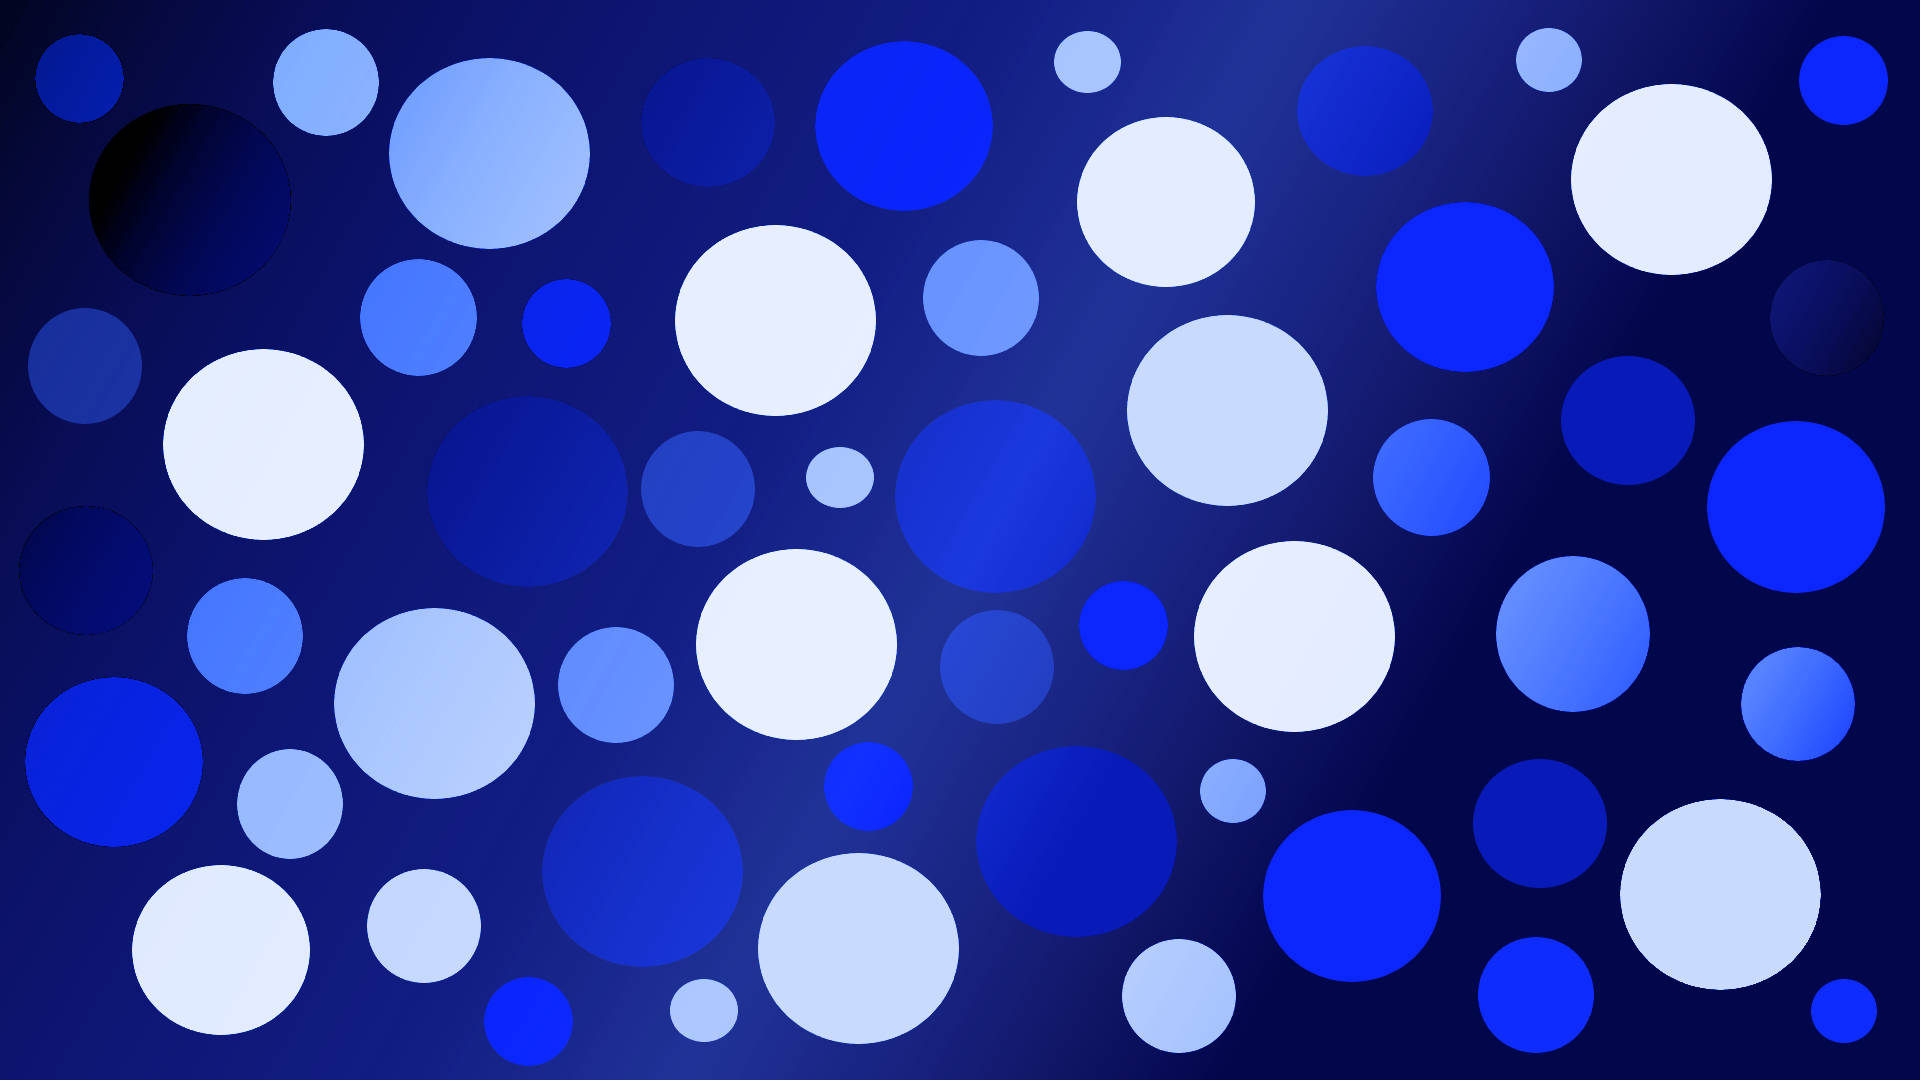 Polka Dots Shades Blue And White Background